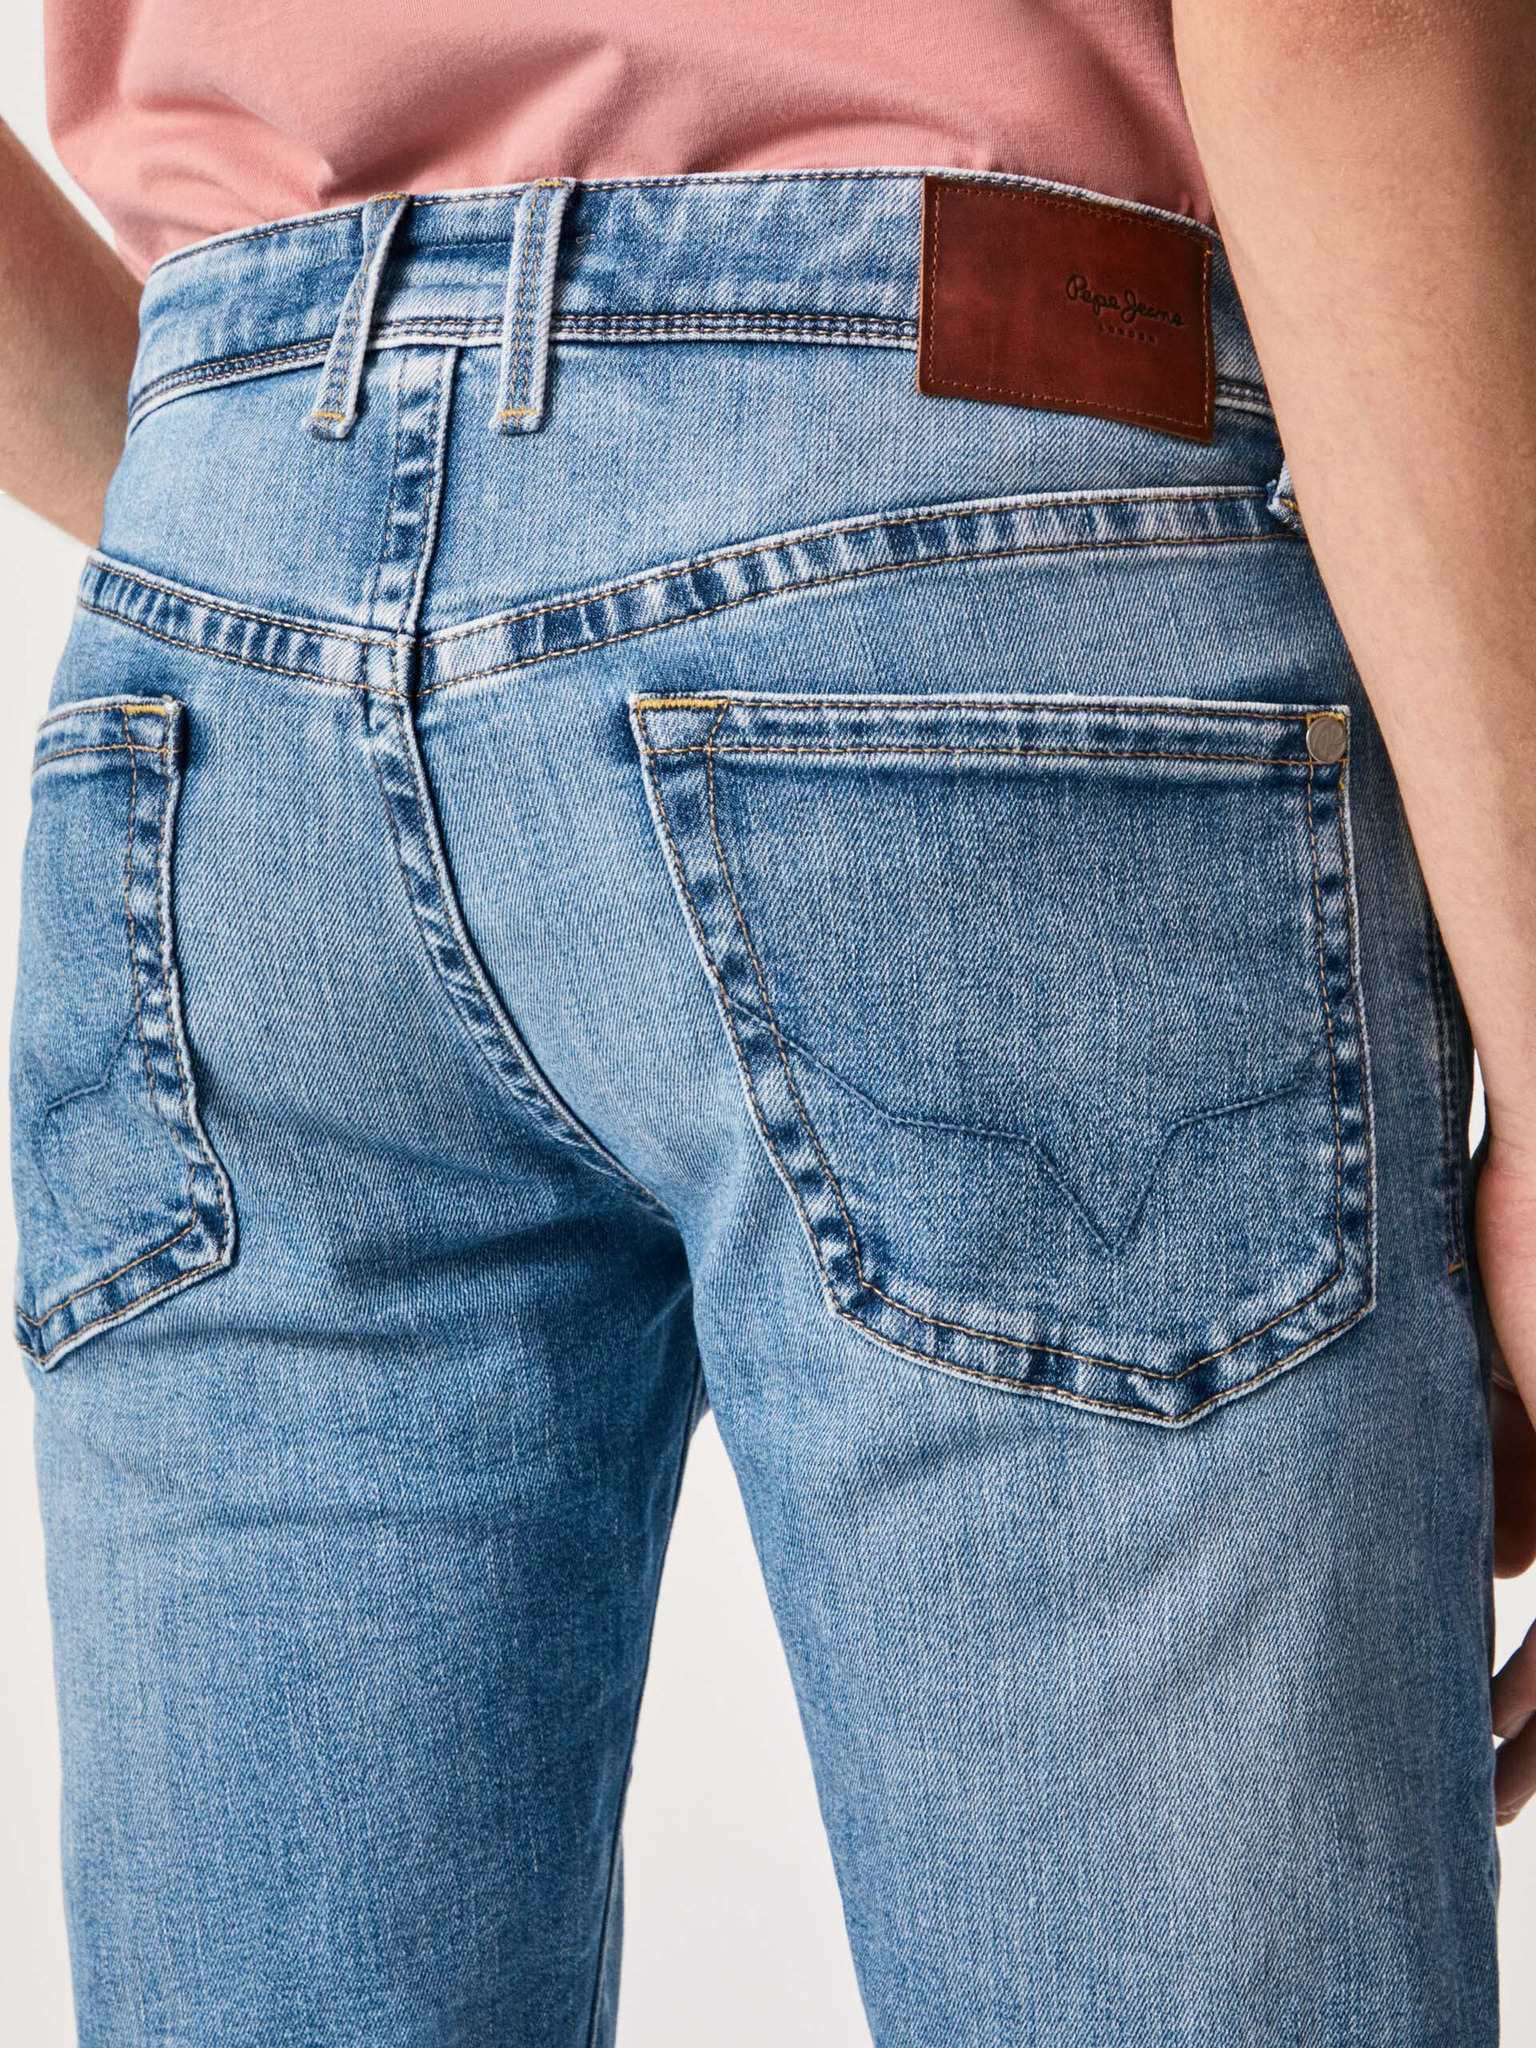 Jeans - Hatch Pepe Jeans